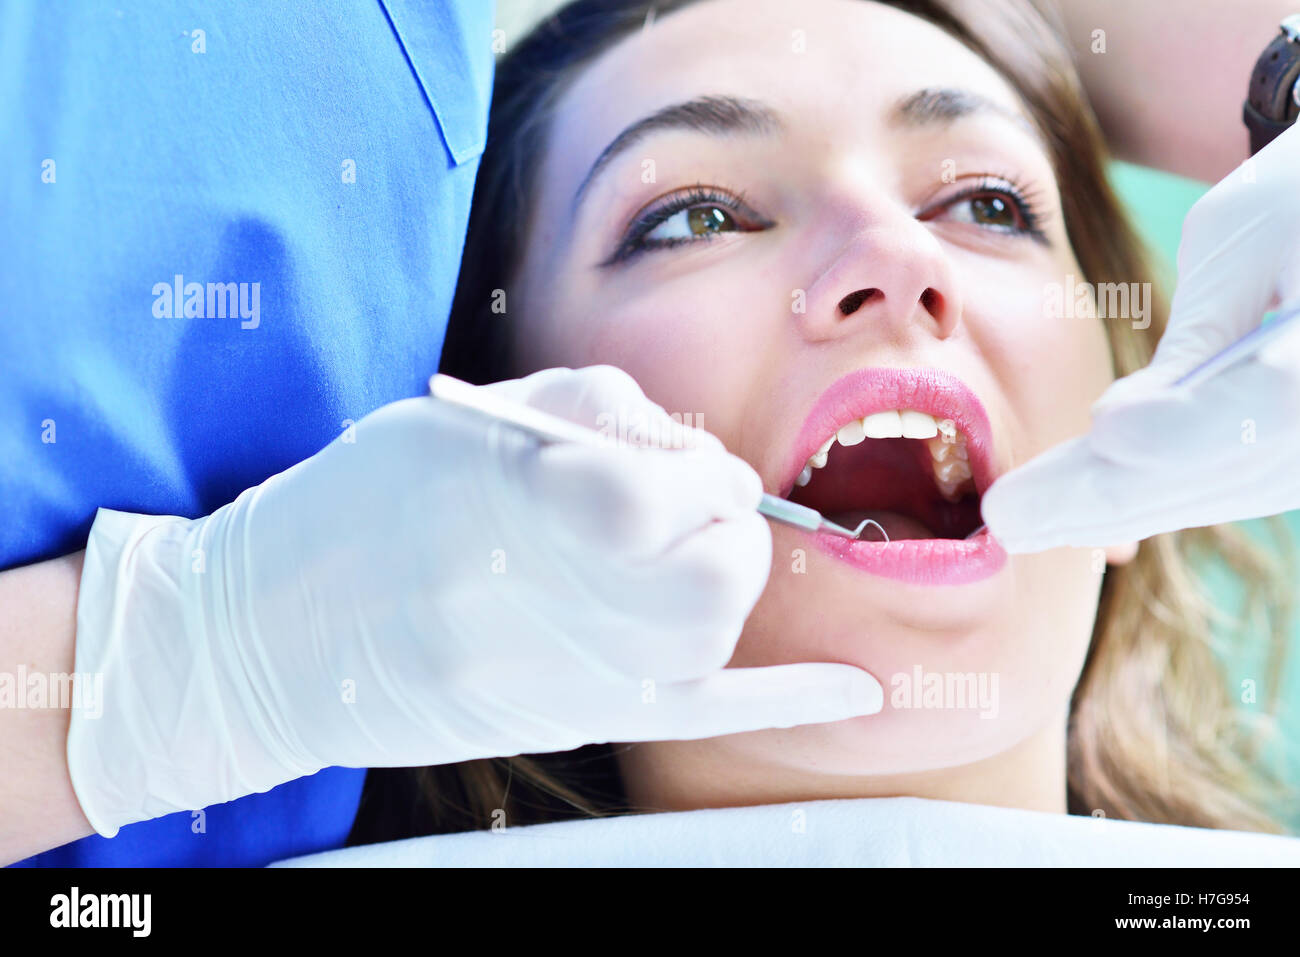 Close-up of female with open mouth during oral checkup at the dentist. Stock Photo